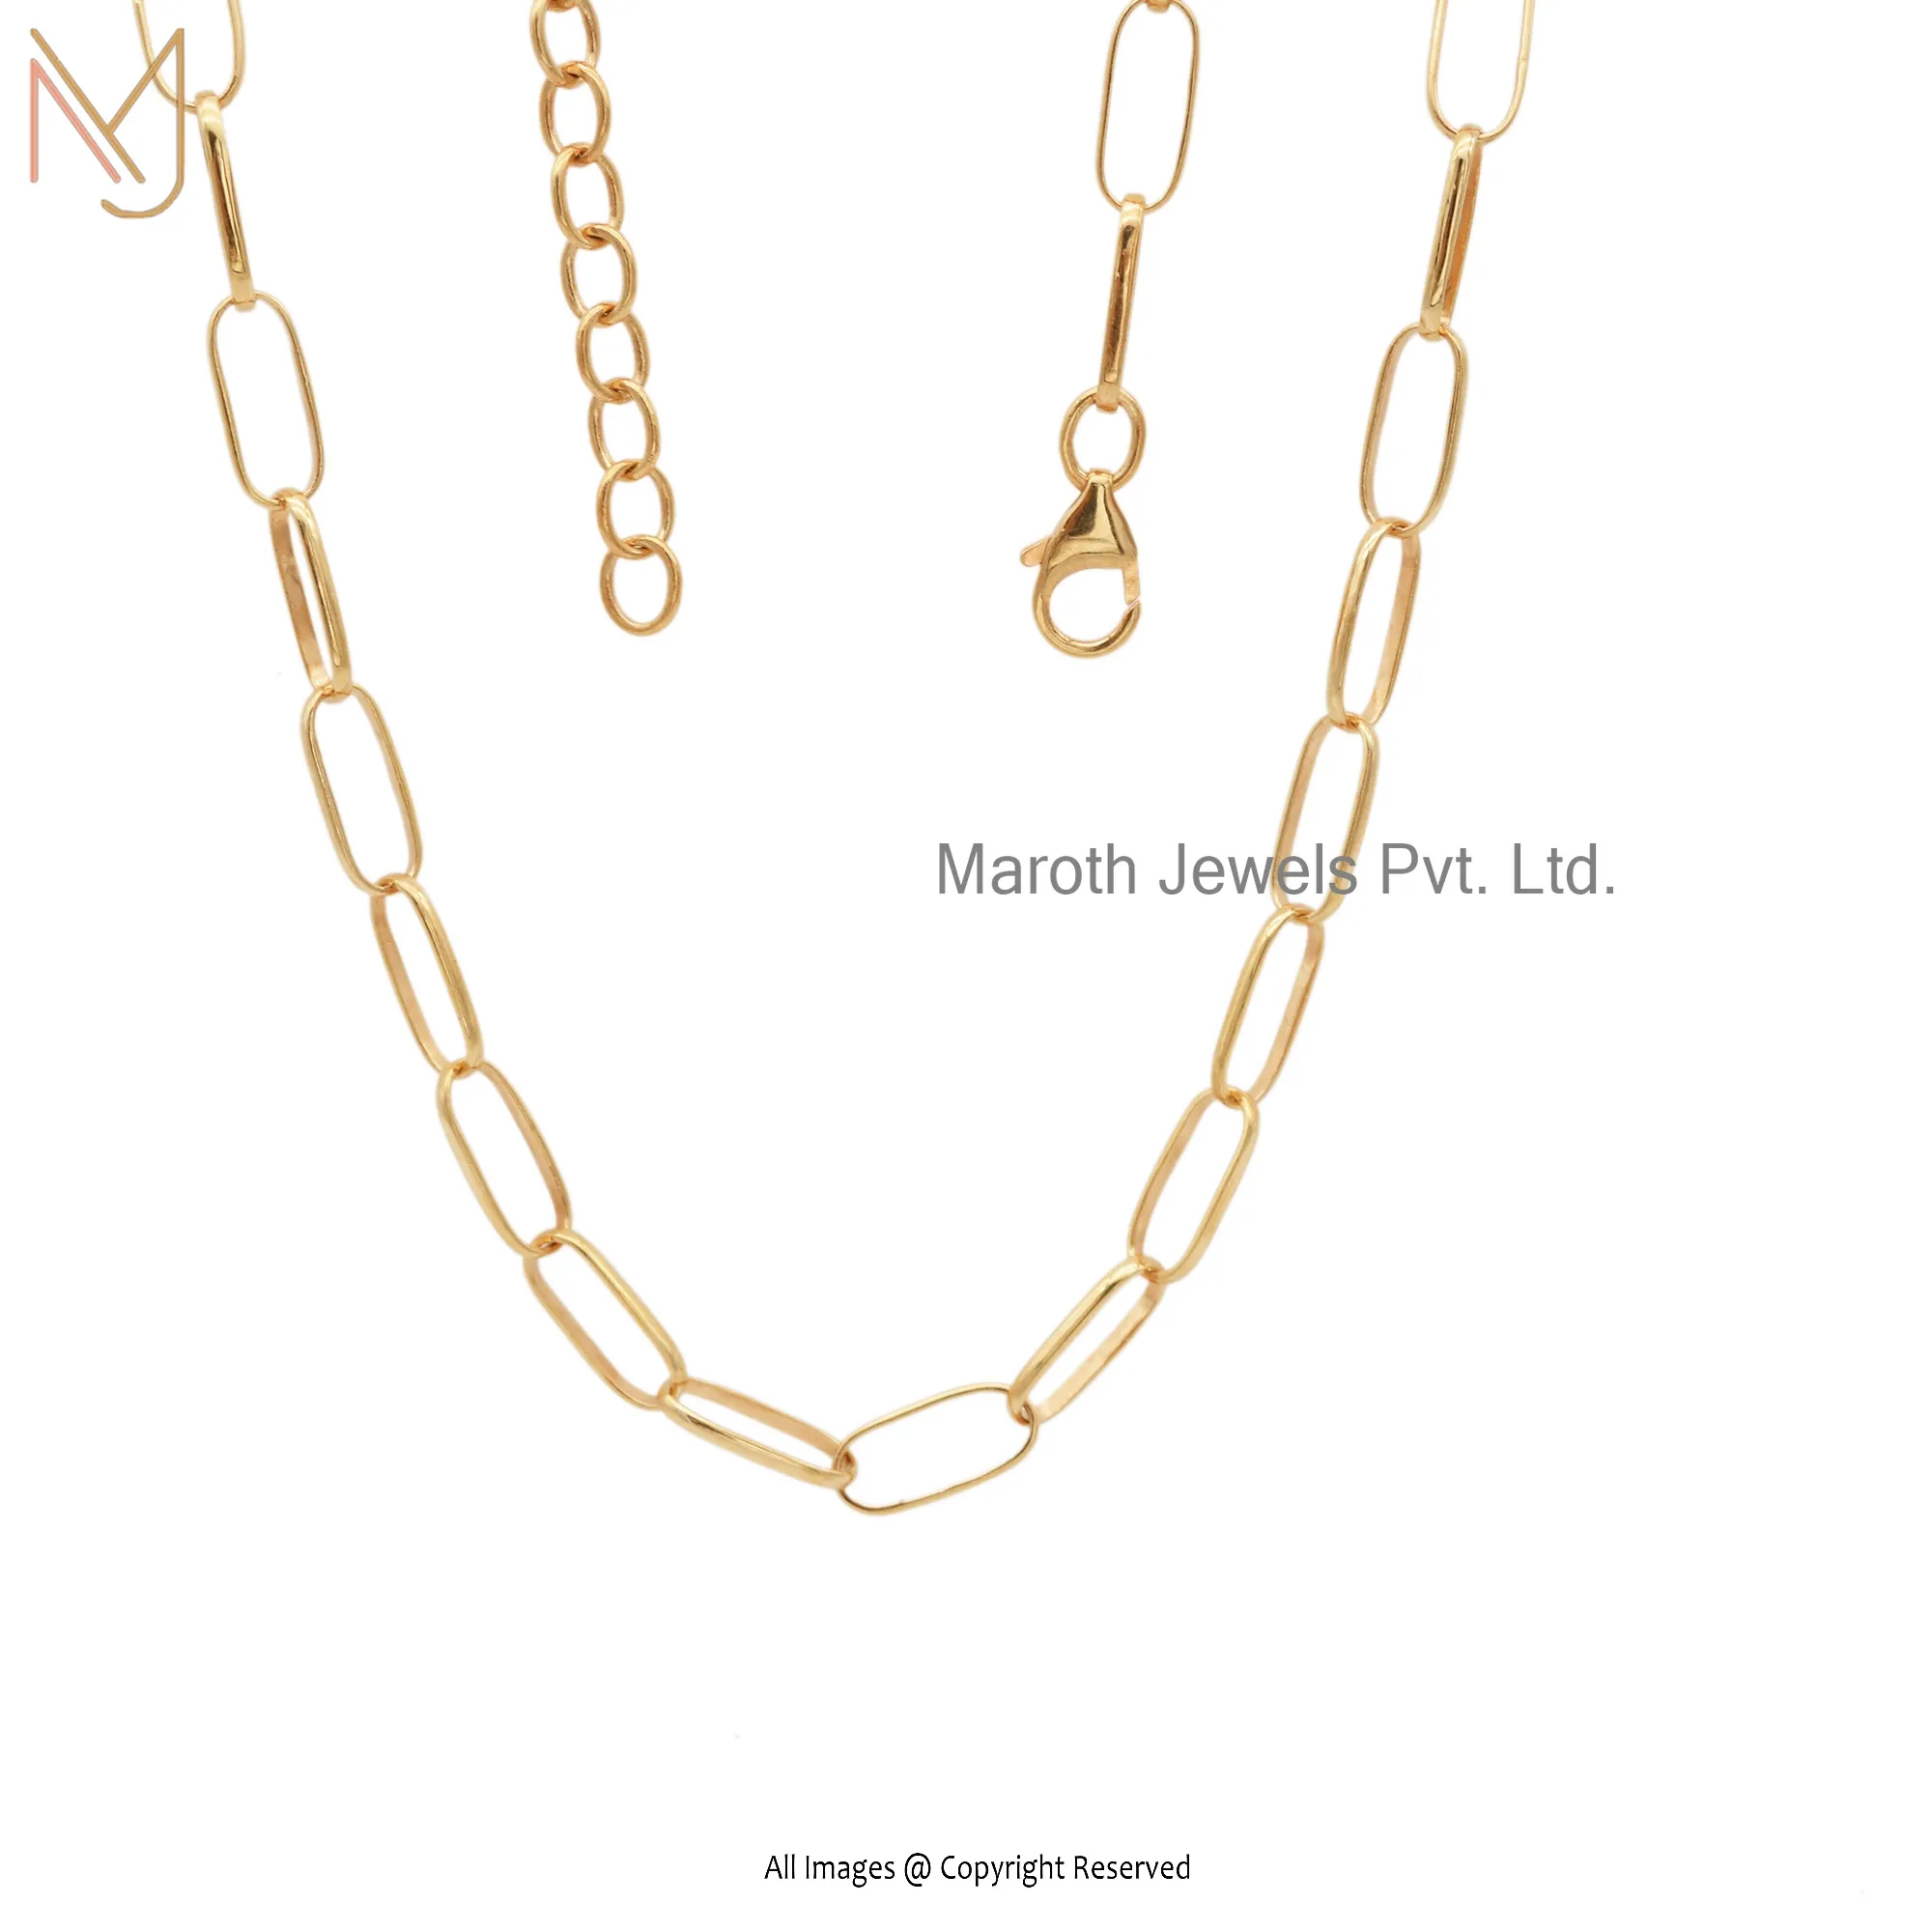 Wholesale 925 Silver Yellow Gold Plated Adjustable Link Chain Necklace